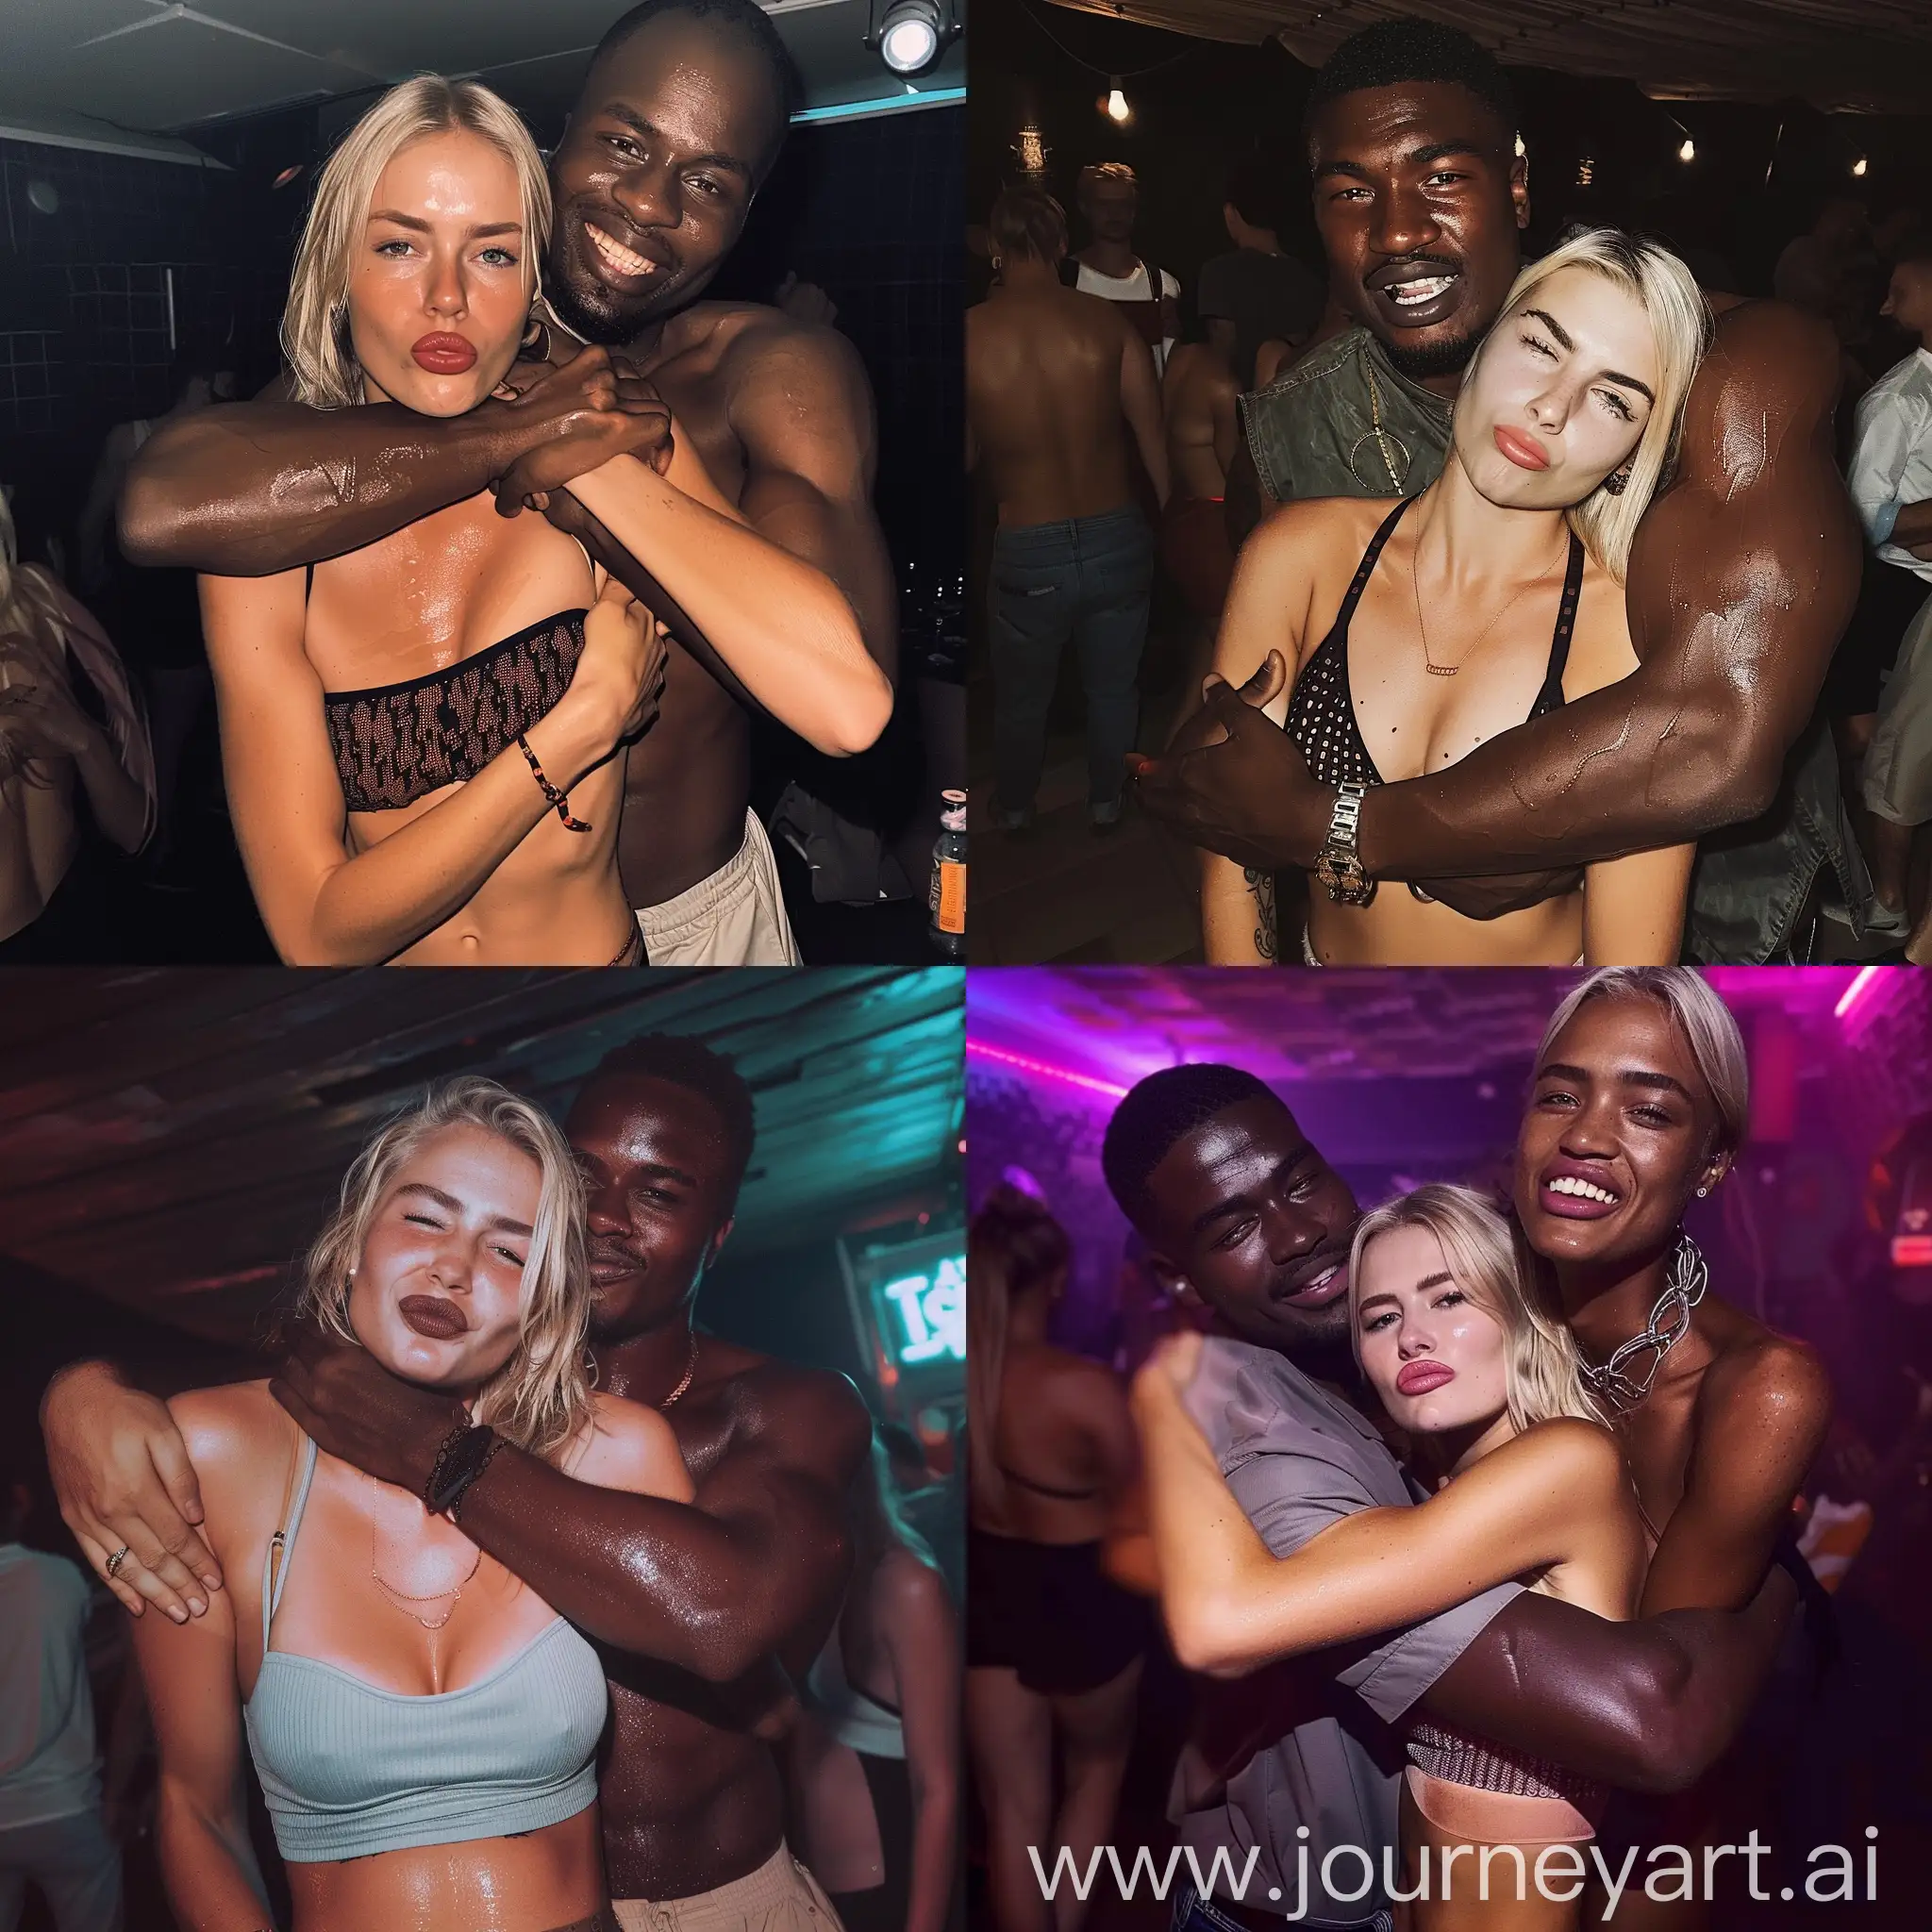 Flirty-Danish-Blonde-Woman-in-Party-Club-Embraced-by-Tall-African-Partner